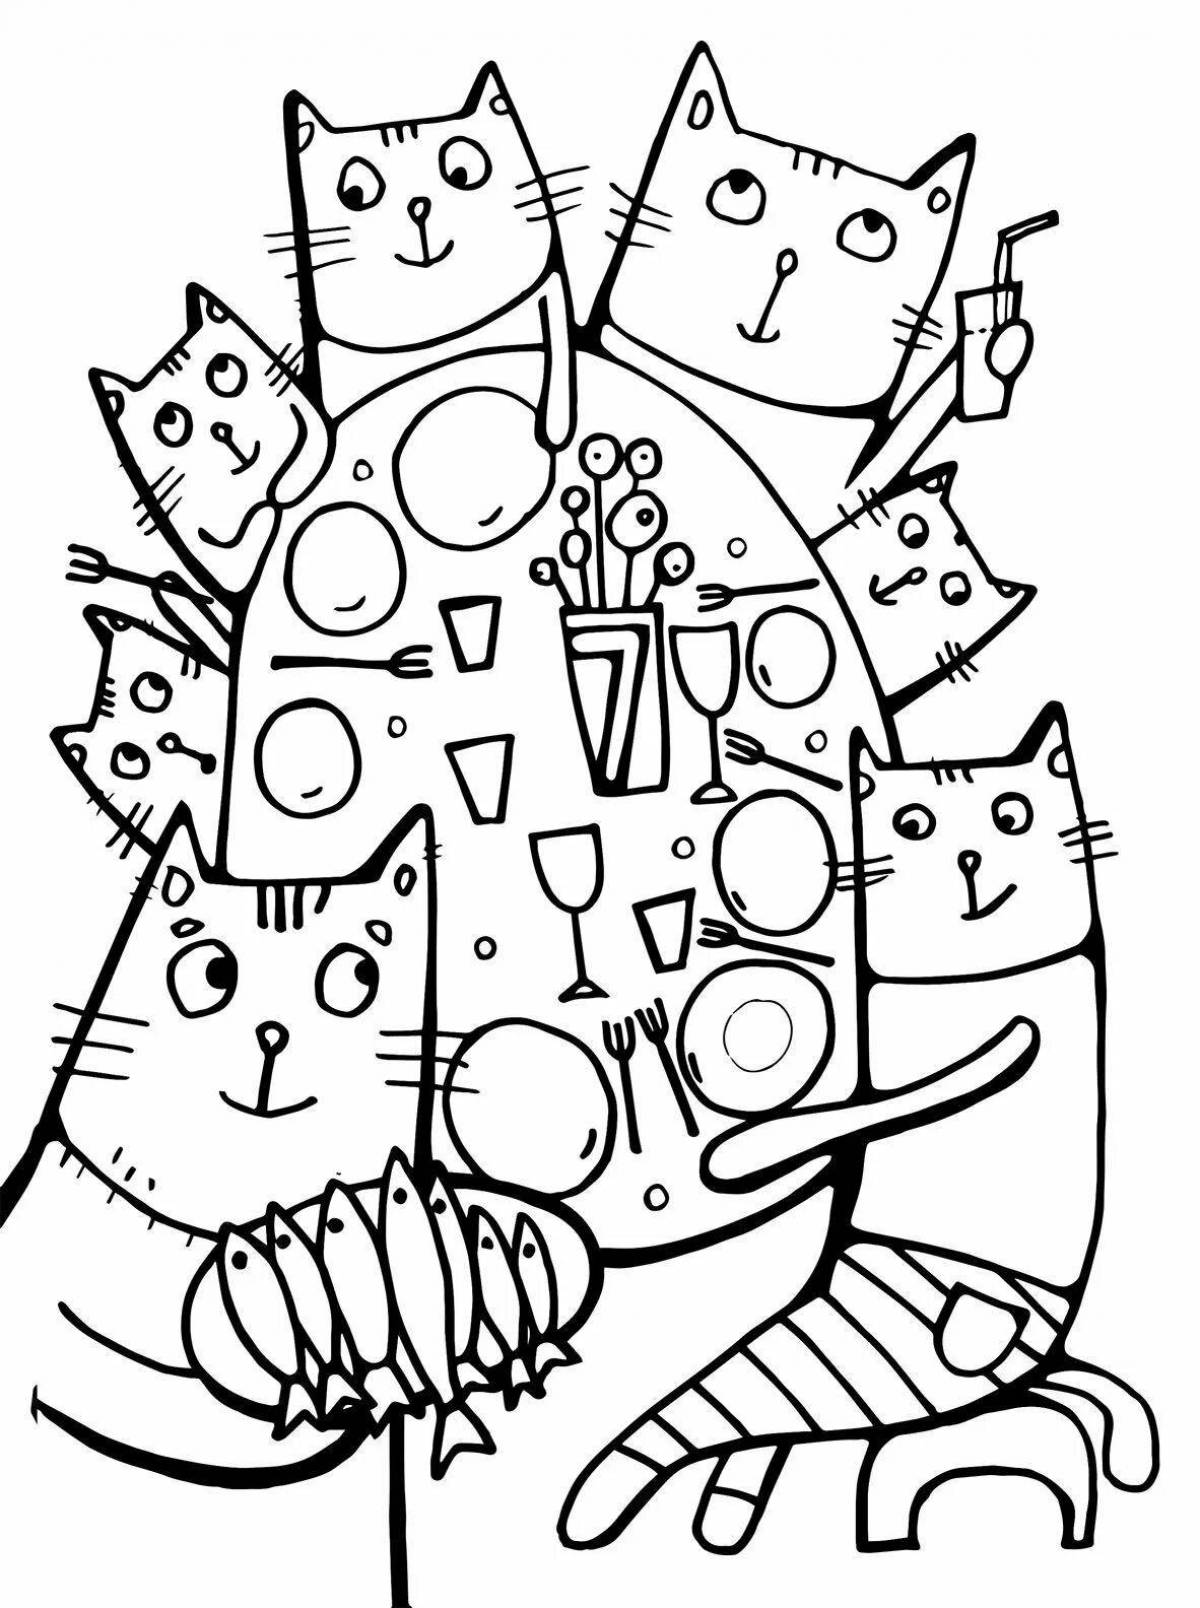 Coloring book funny cat family